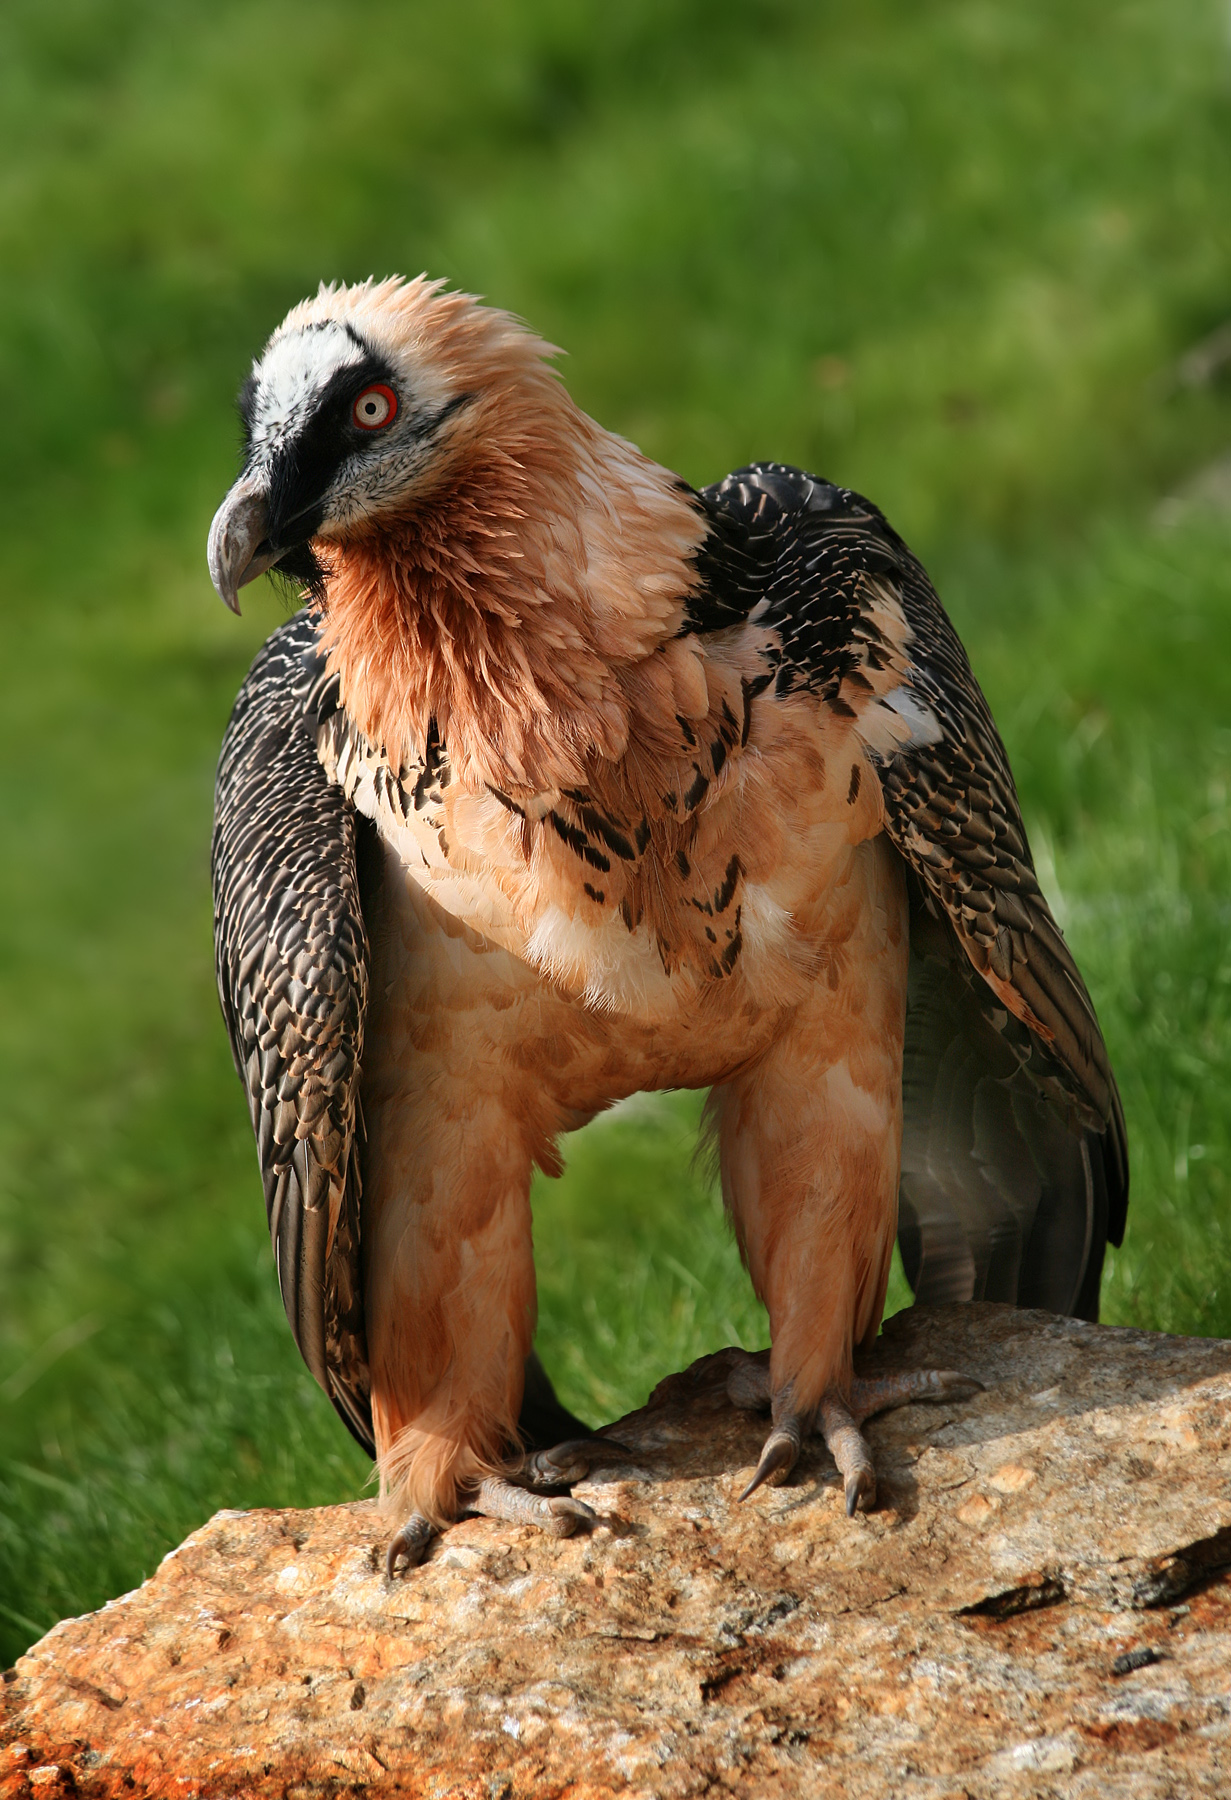 Is the bearded vulture an eagle?